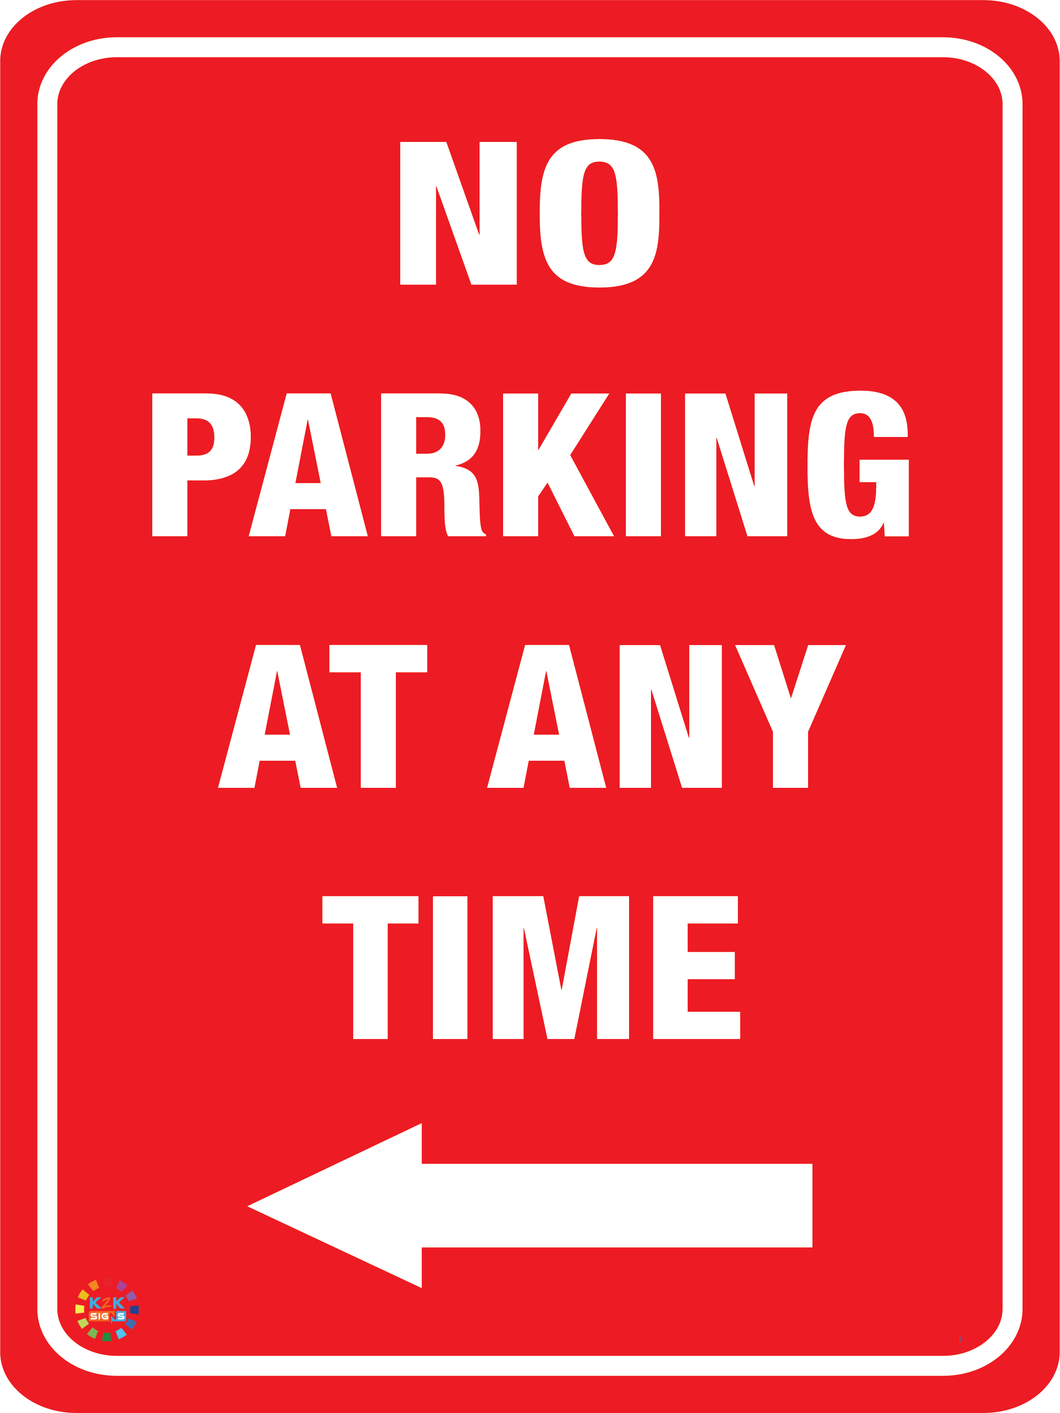 No Parking At Any Time (Left Arrow) Sign